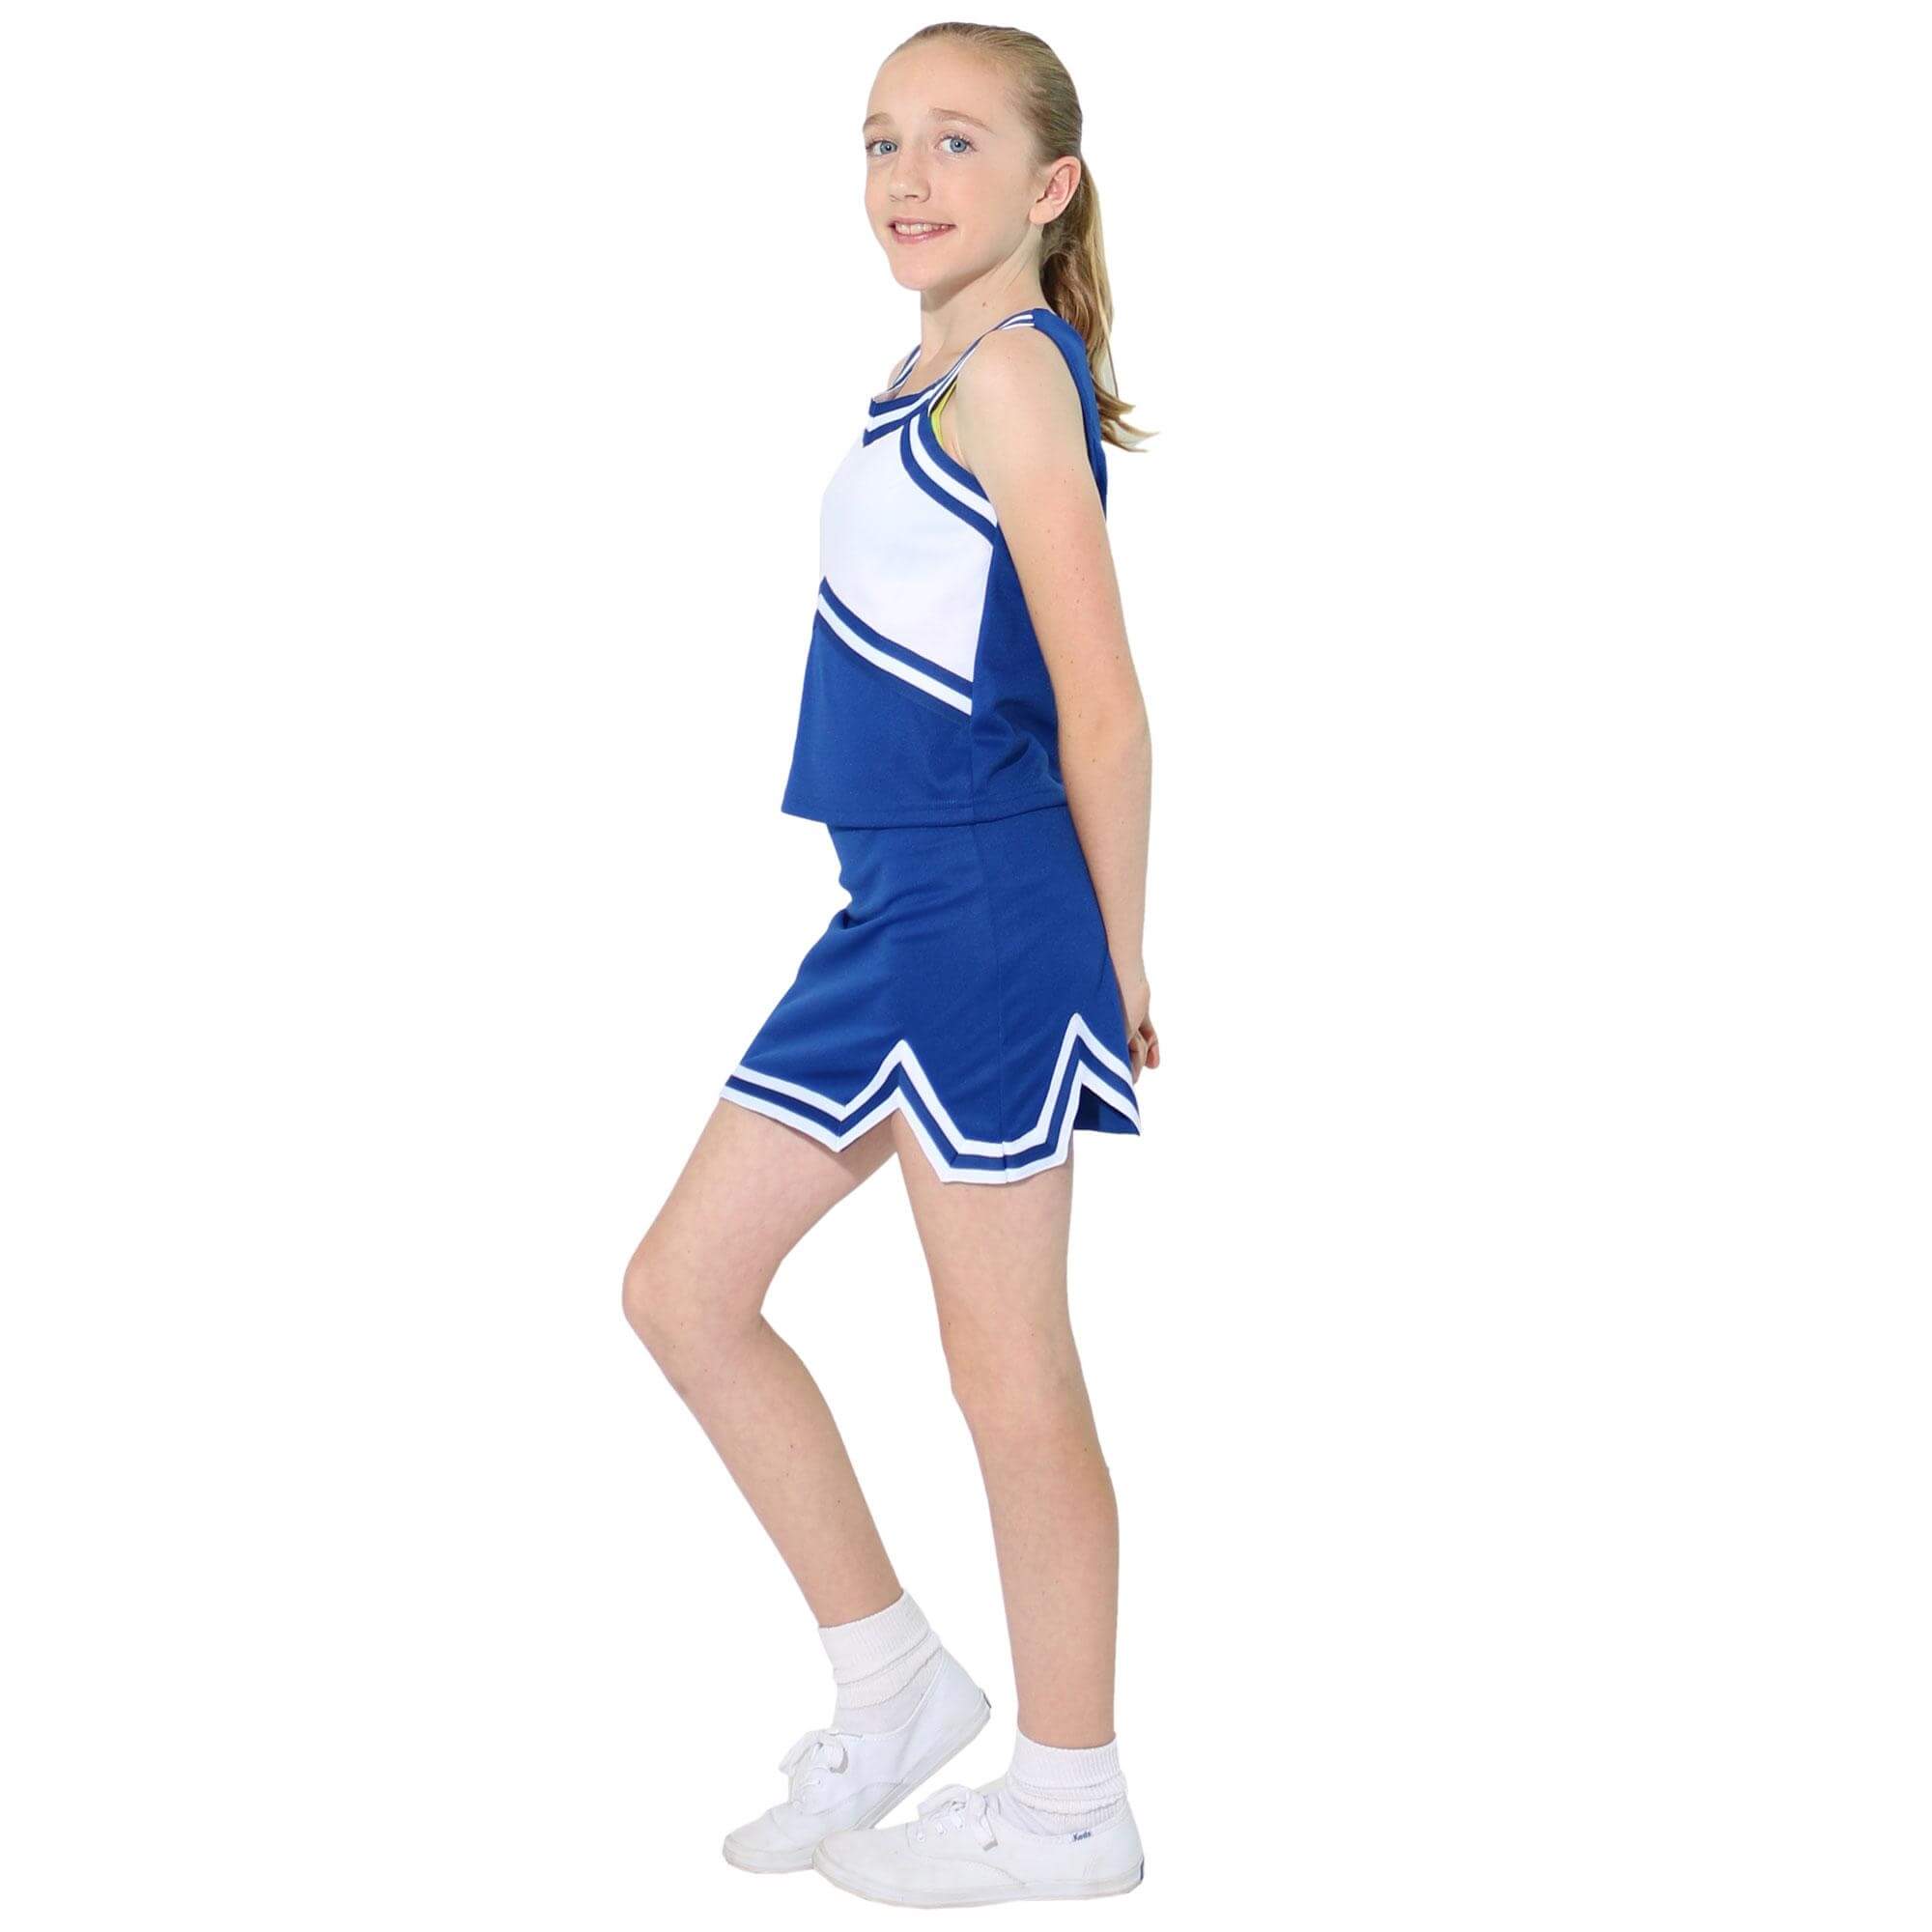 Danzcue Child Sweetheart Cheerleaders Uniform Shell Top - Click Image to Close